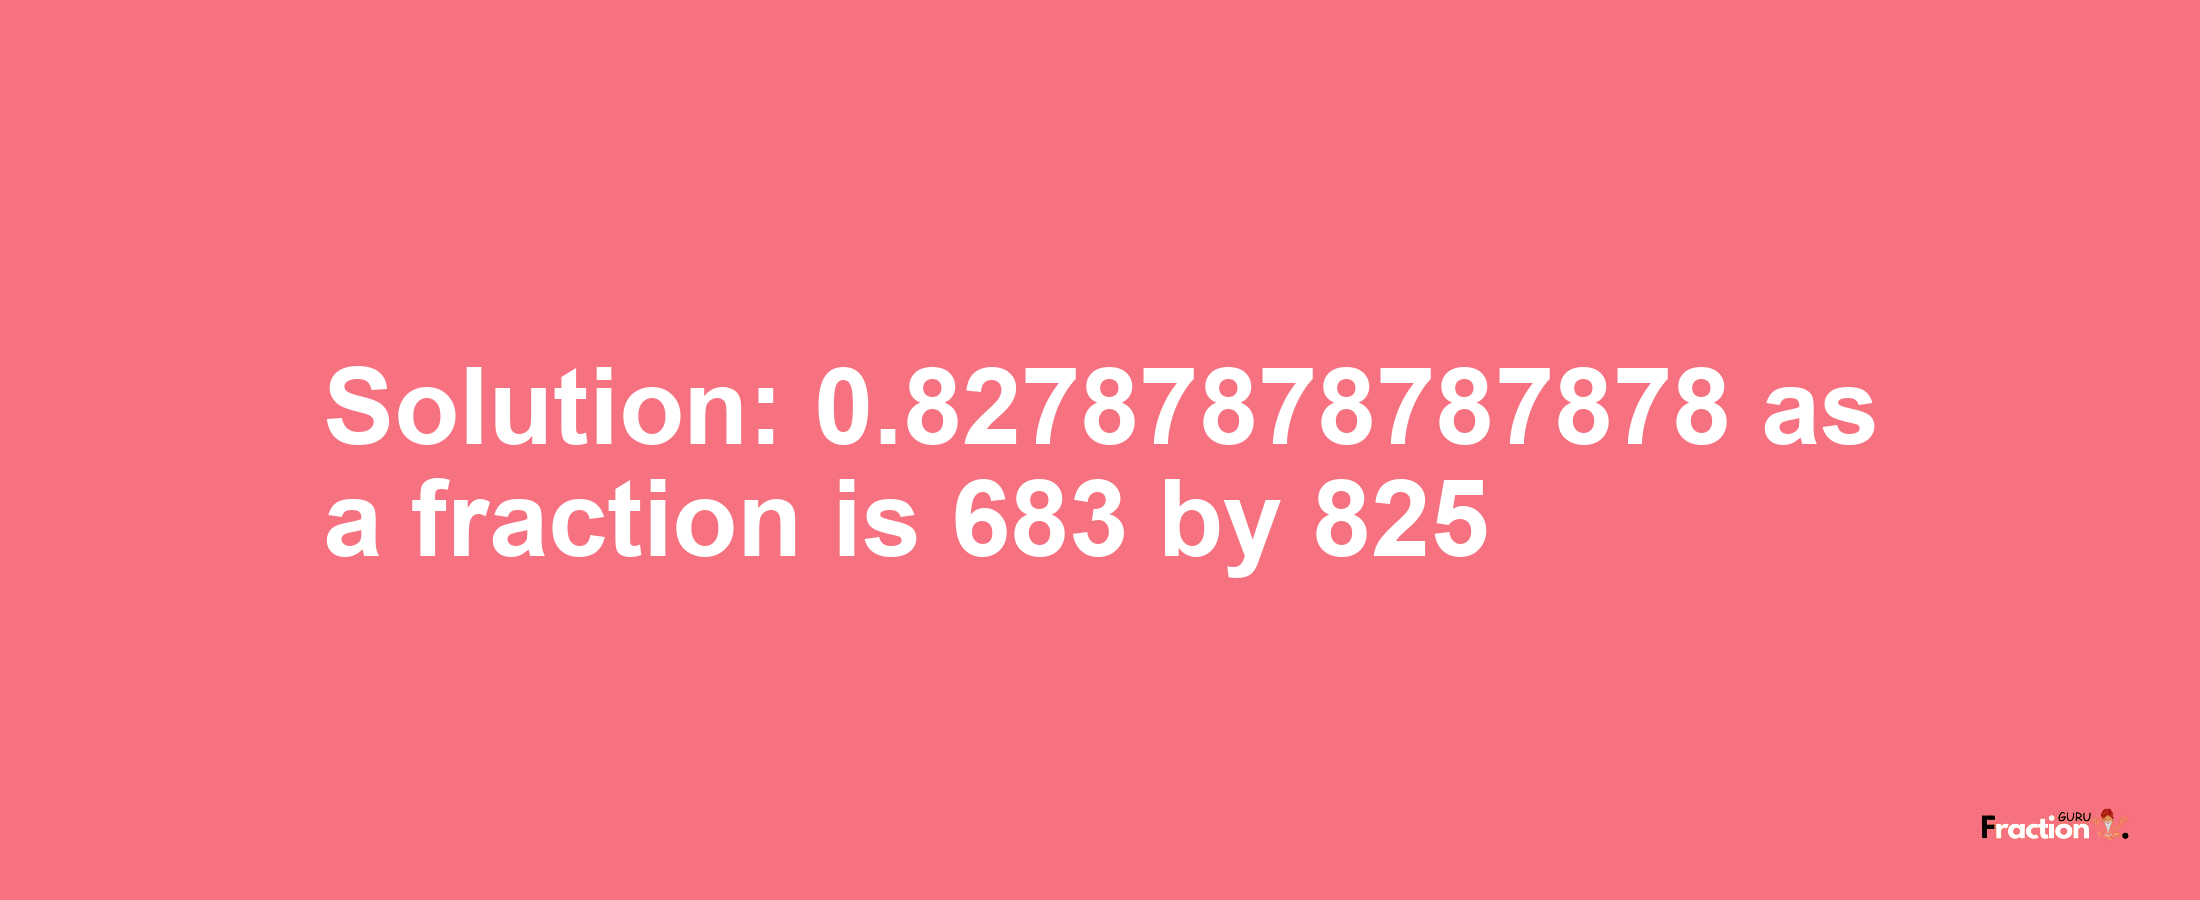 Solution:0.82787878787878 as a fraction is 683/825